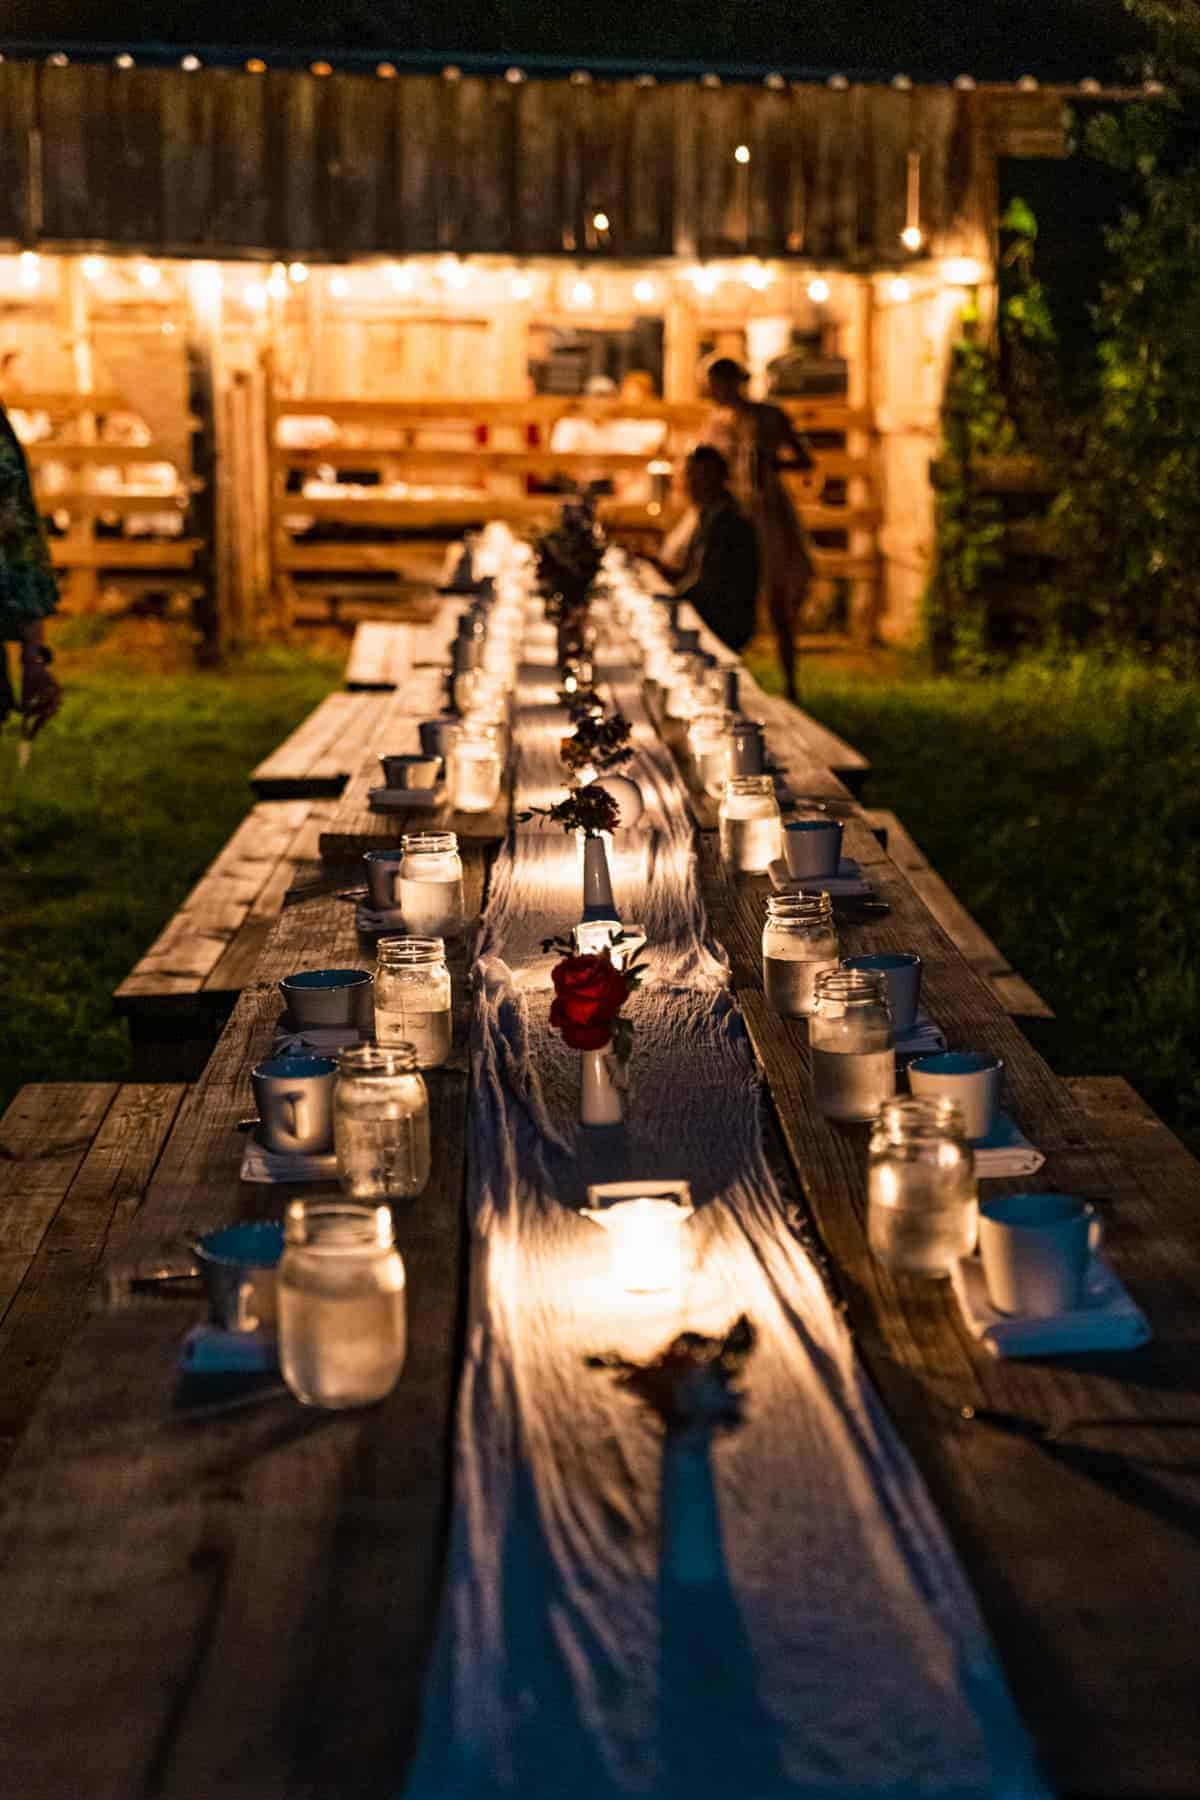 Long wooden table lit with candles and a barn in the background